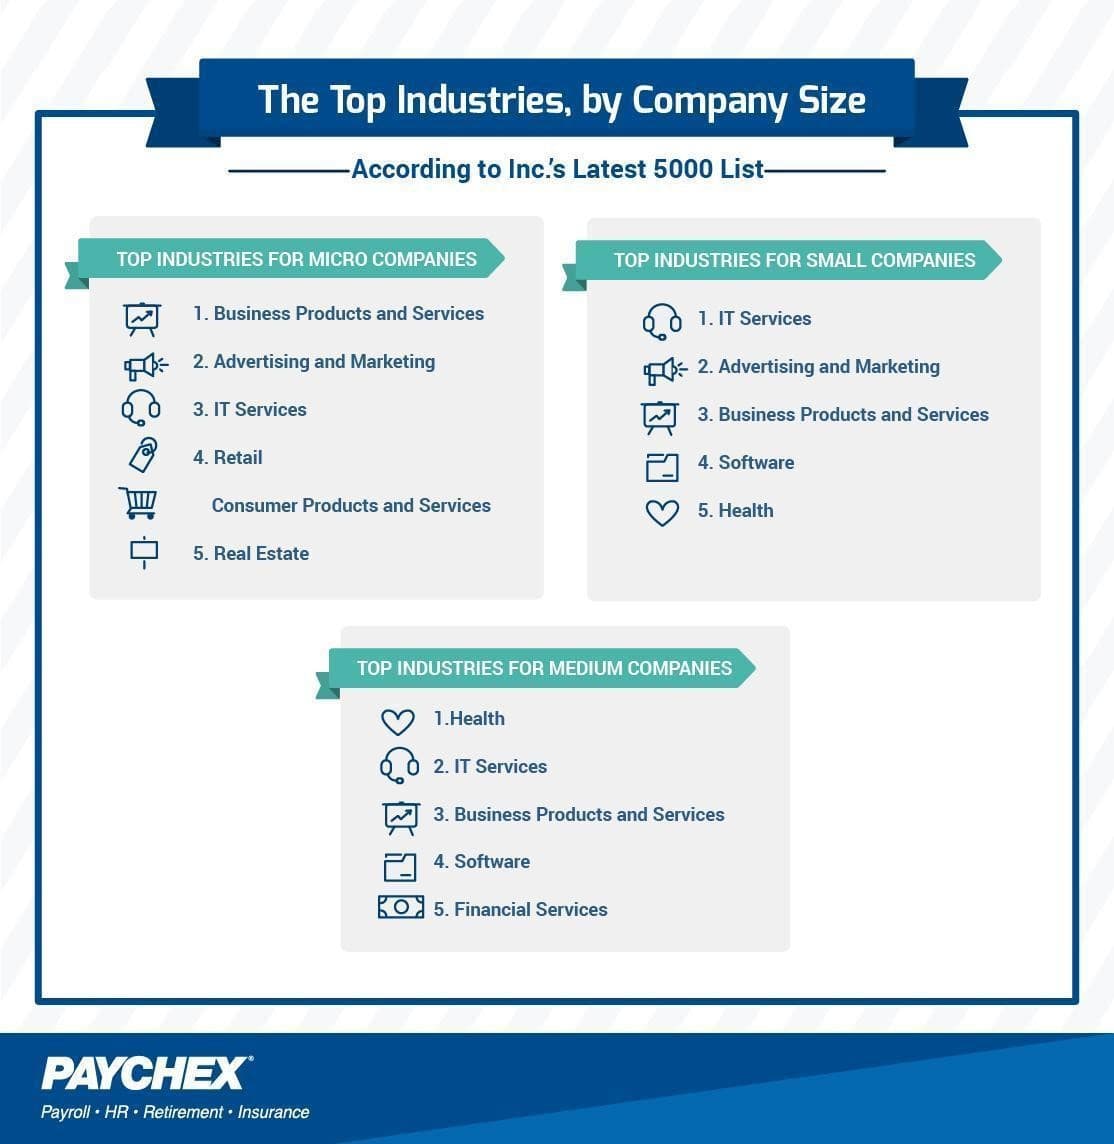 Top Industries by Company Size